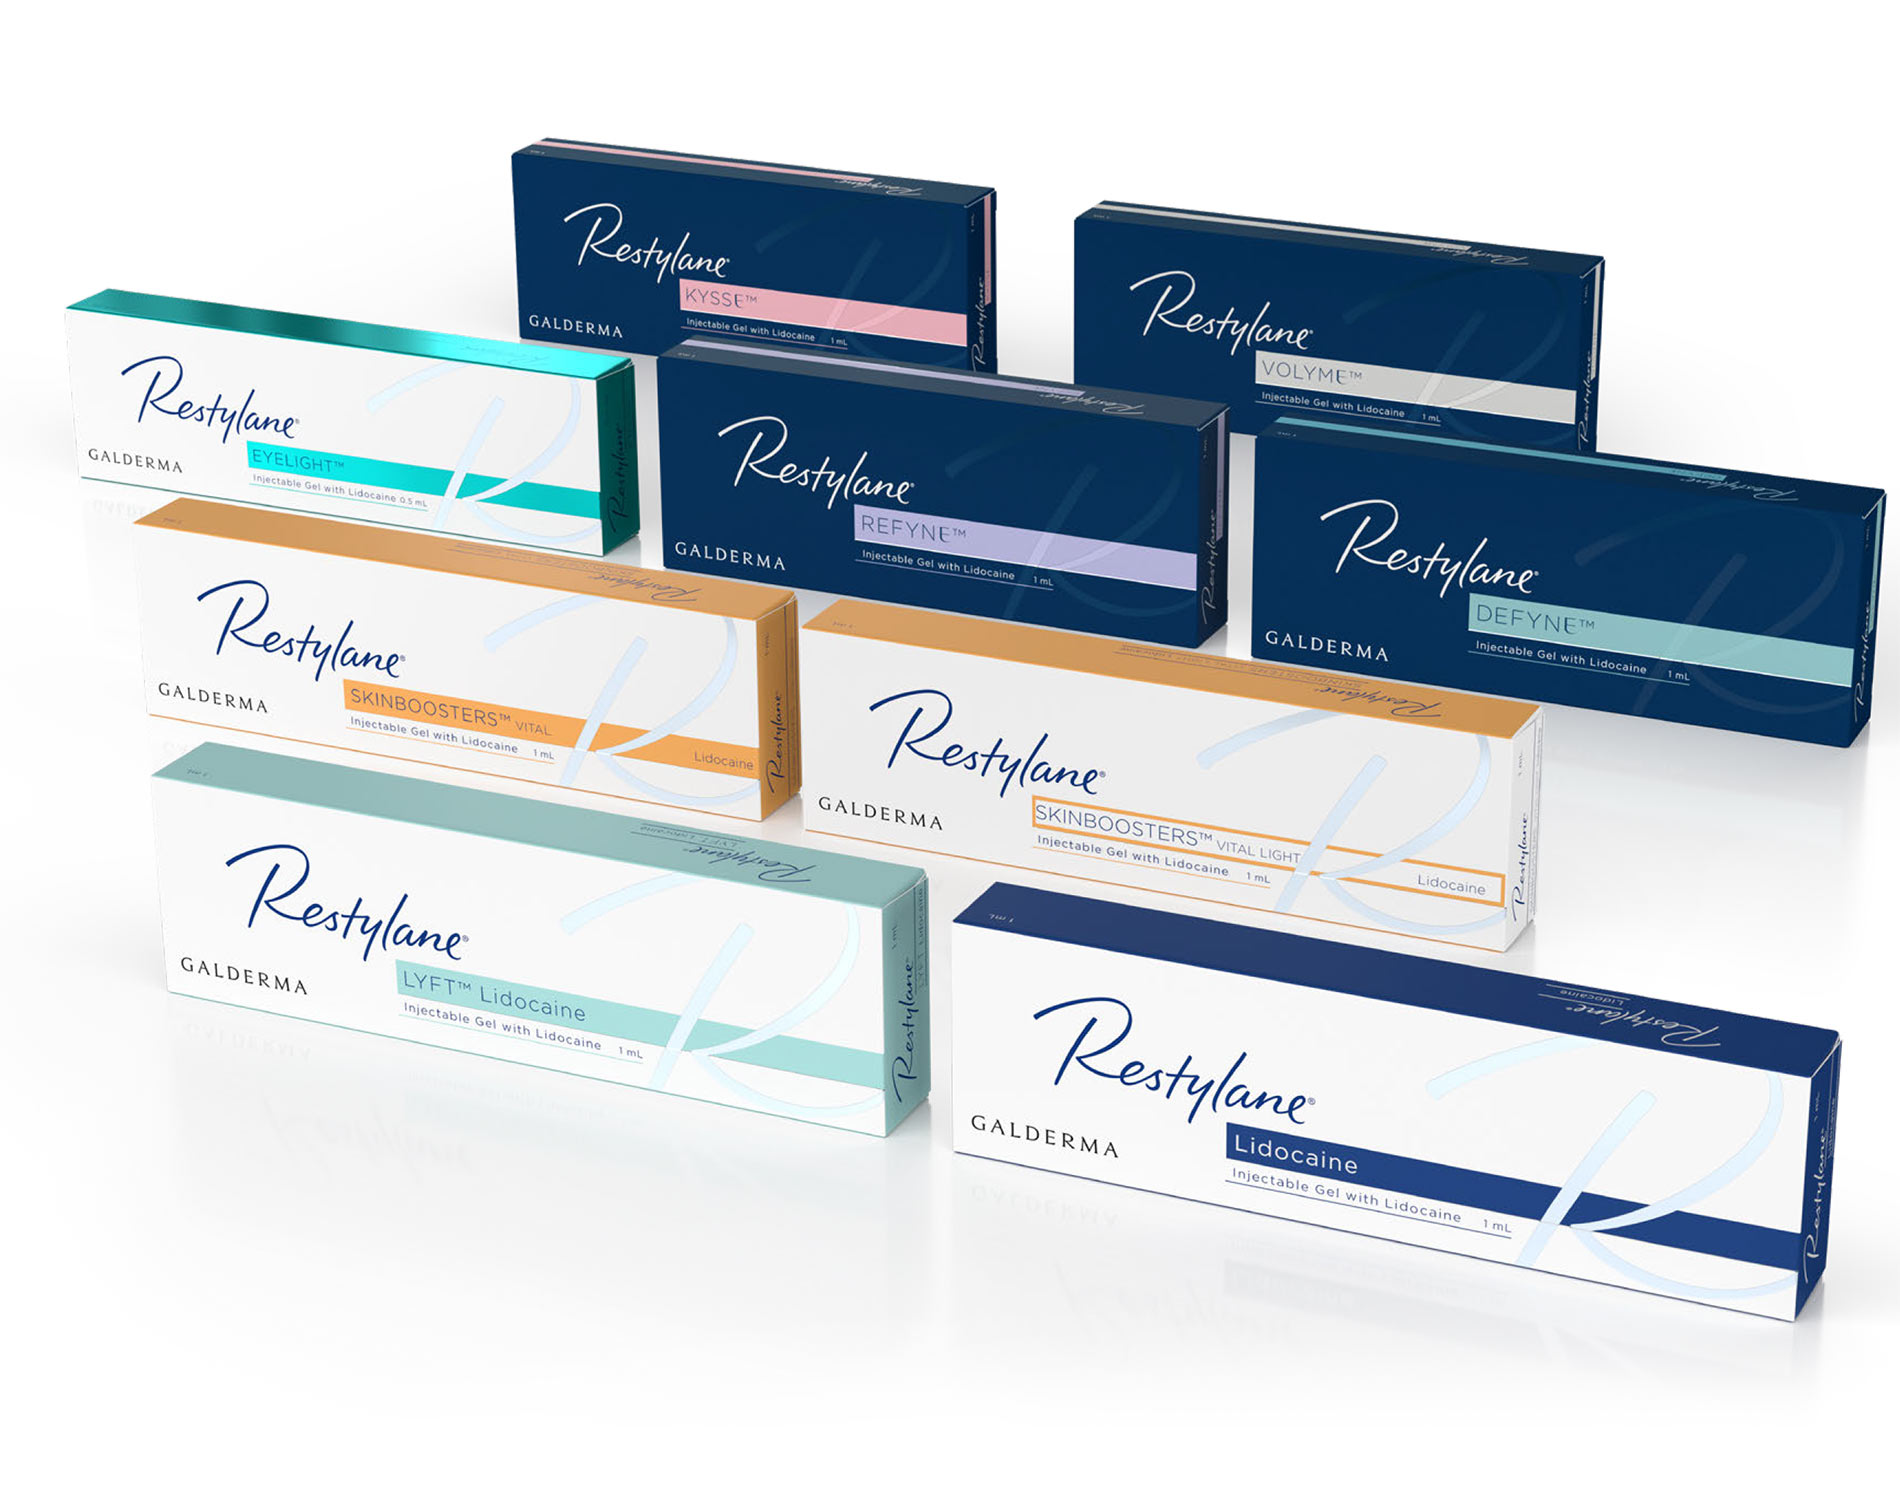 Restylane products